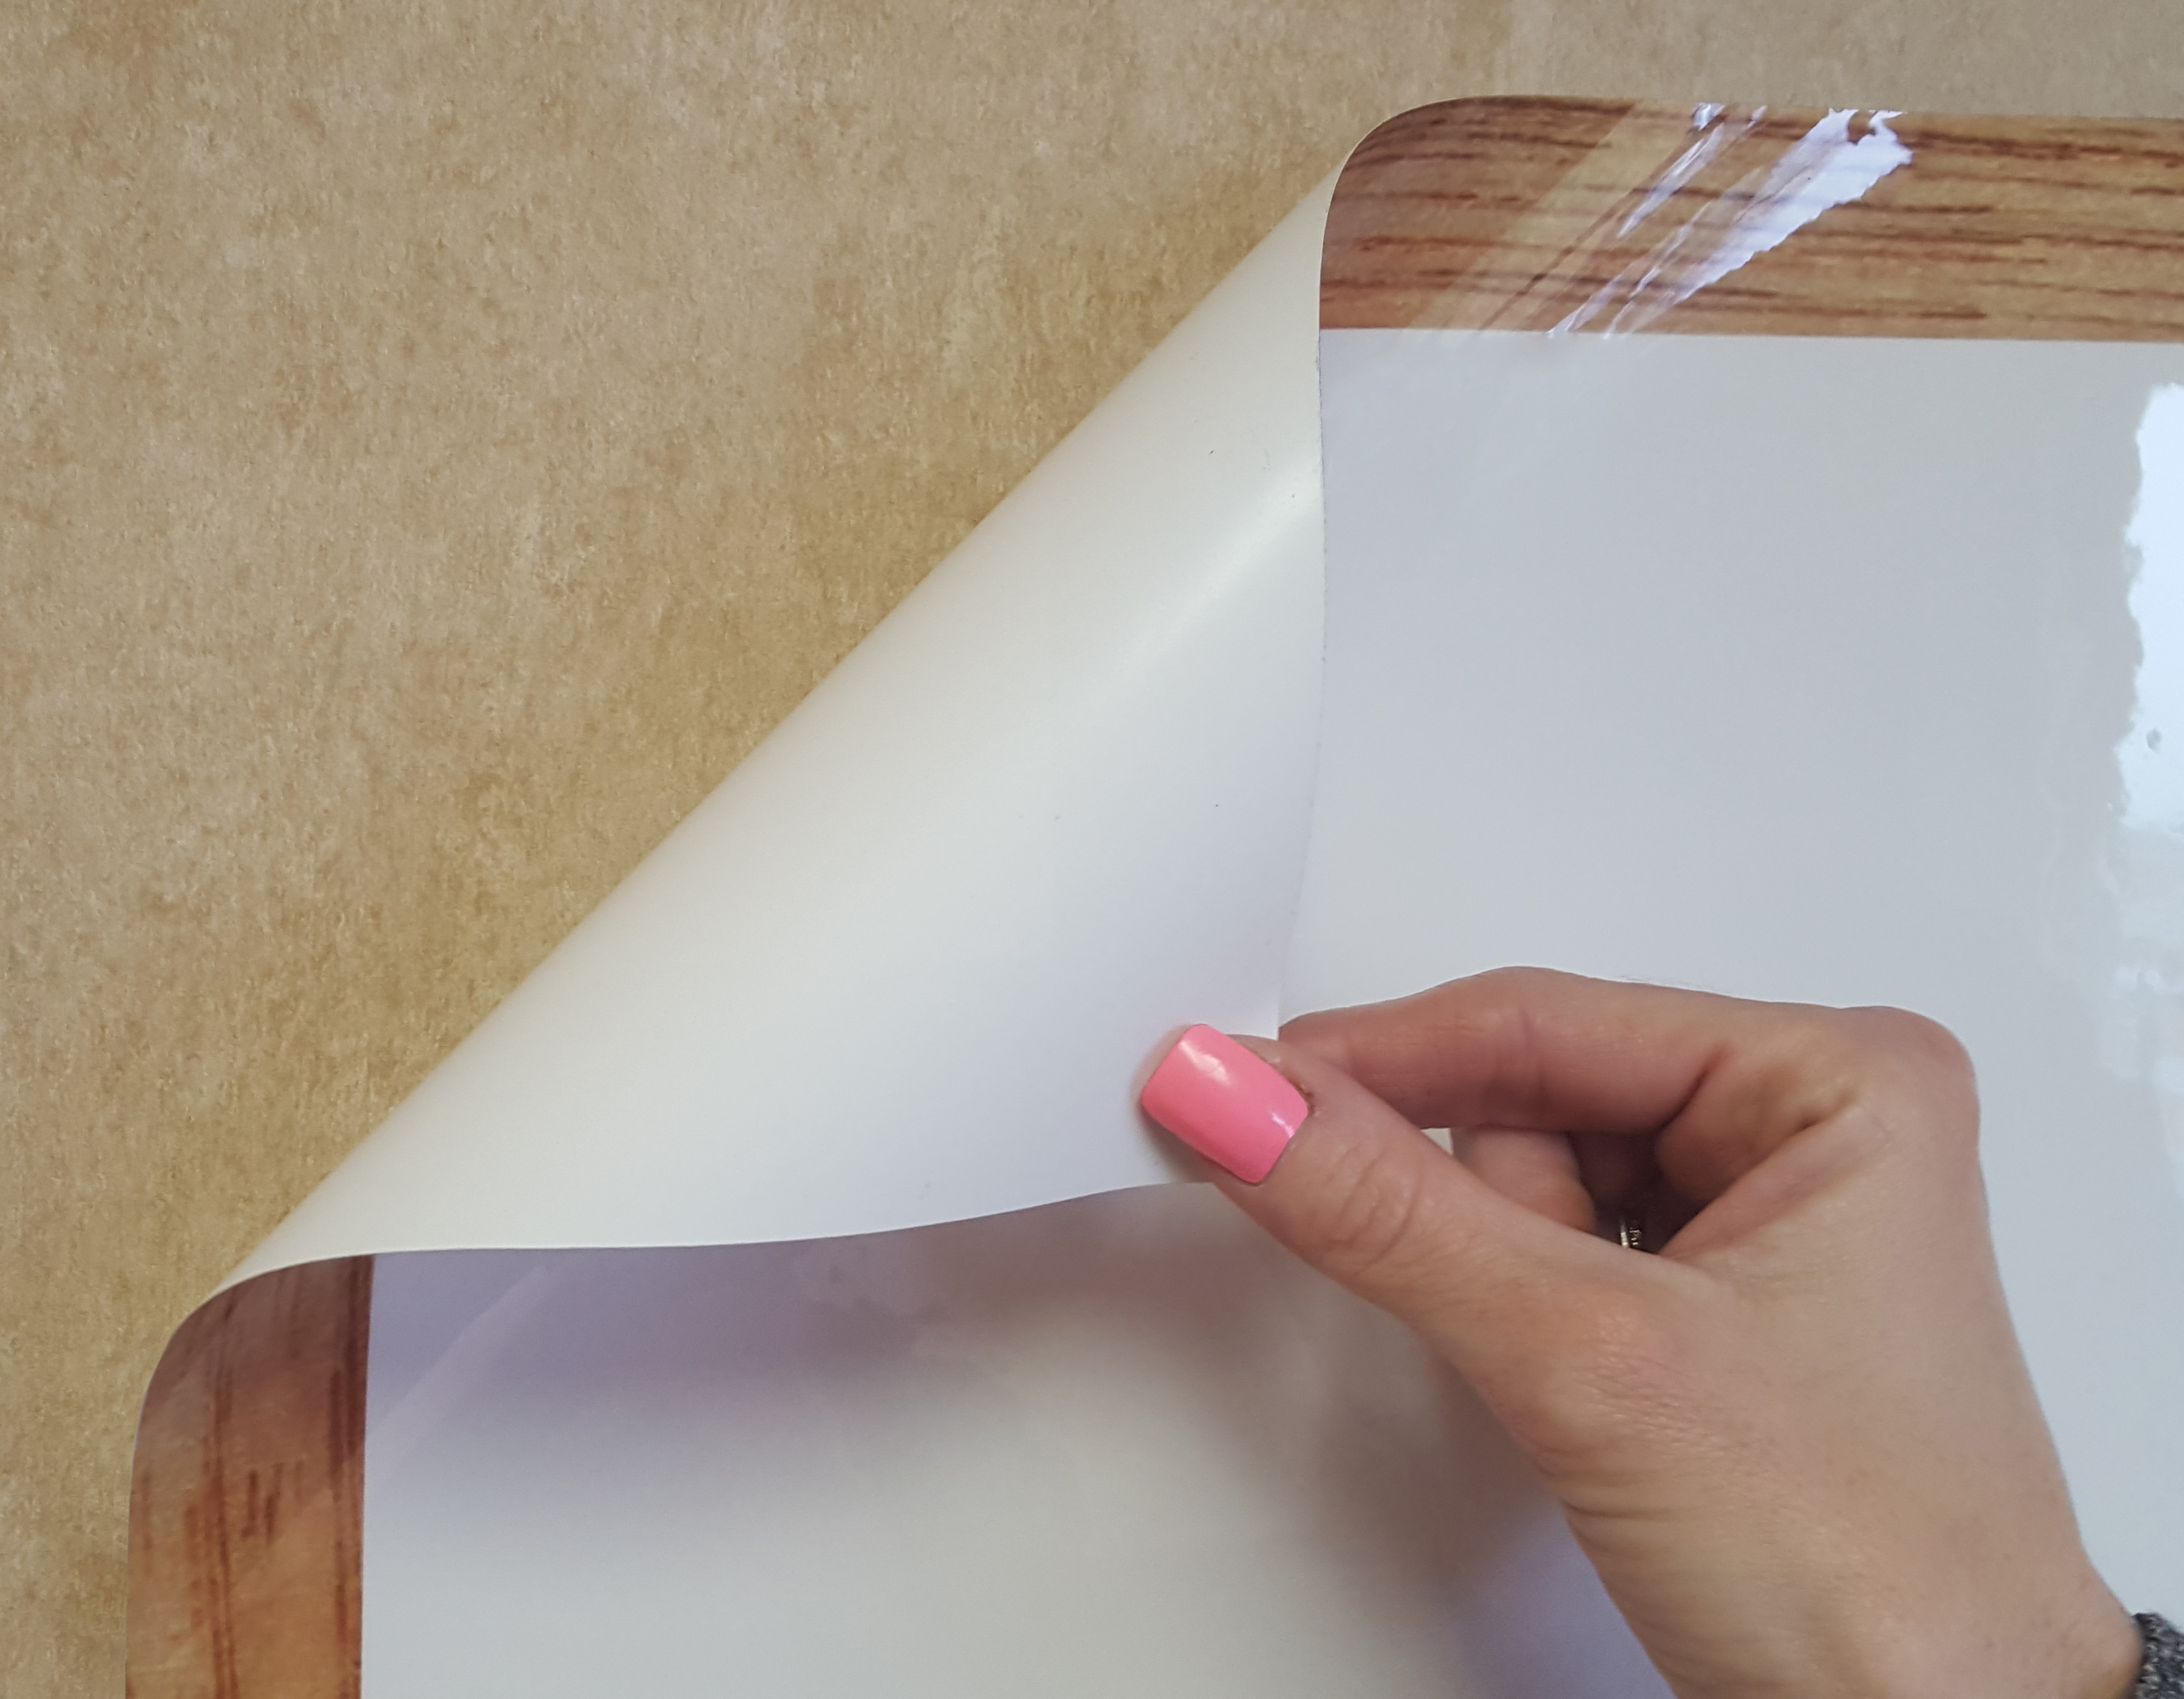 Buy Everase Re-Stic Dry Erase Sheets